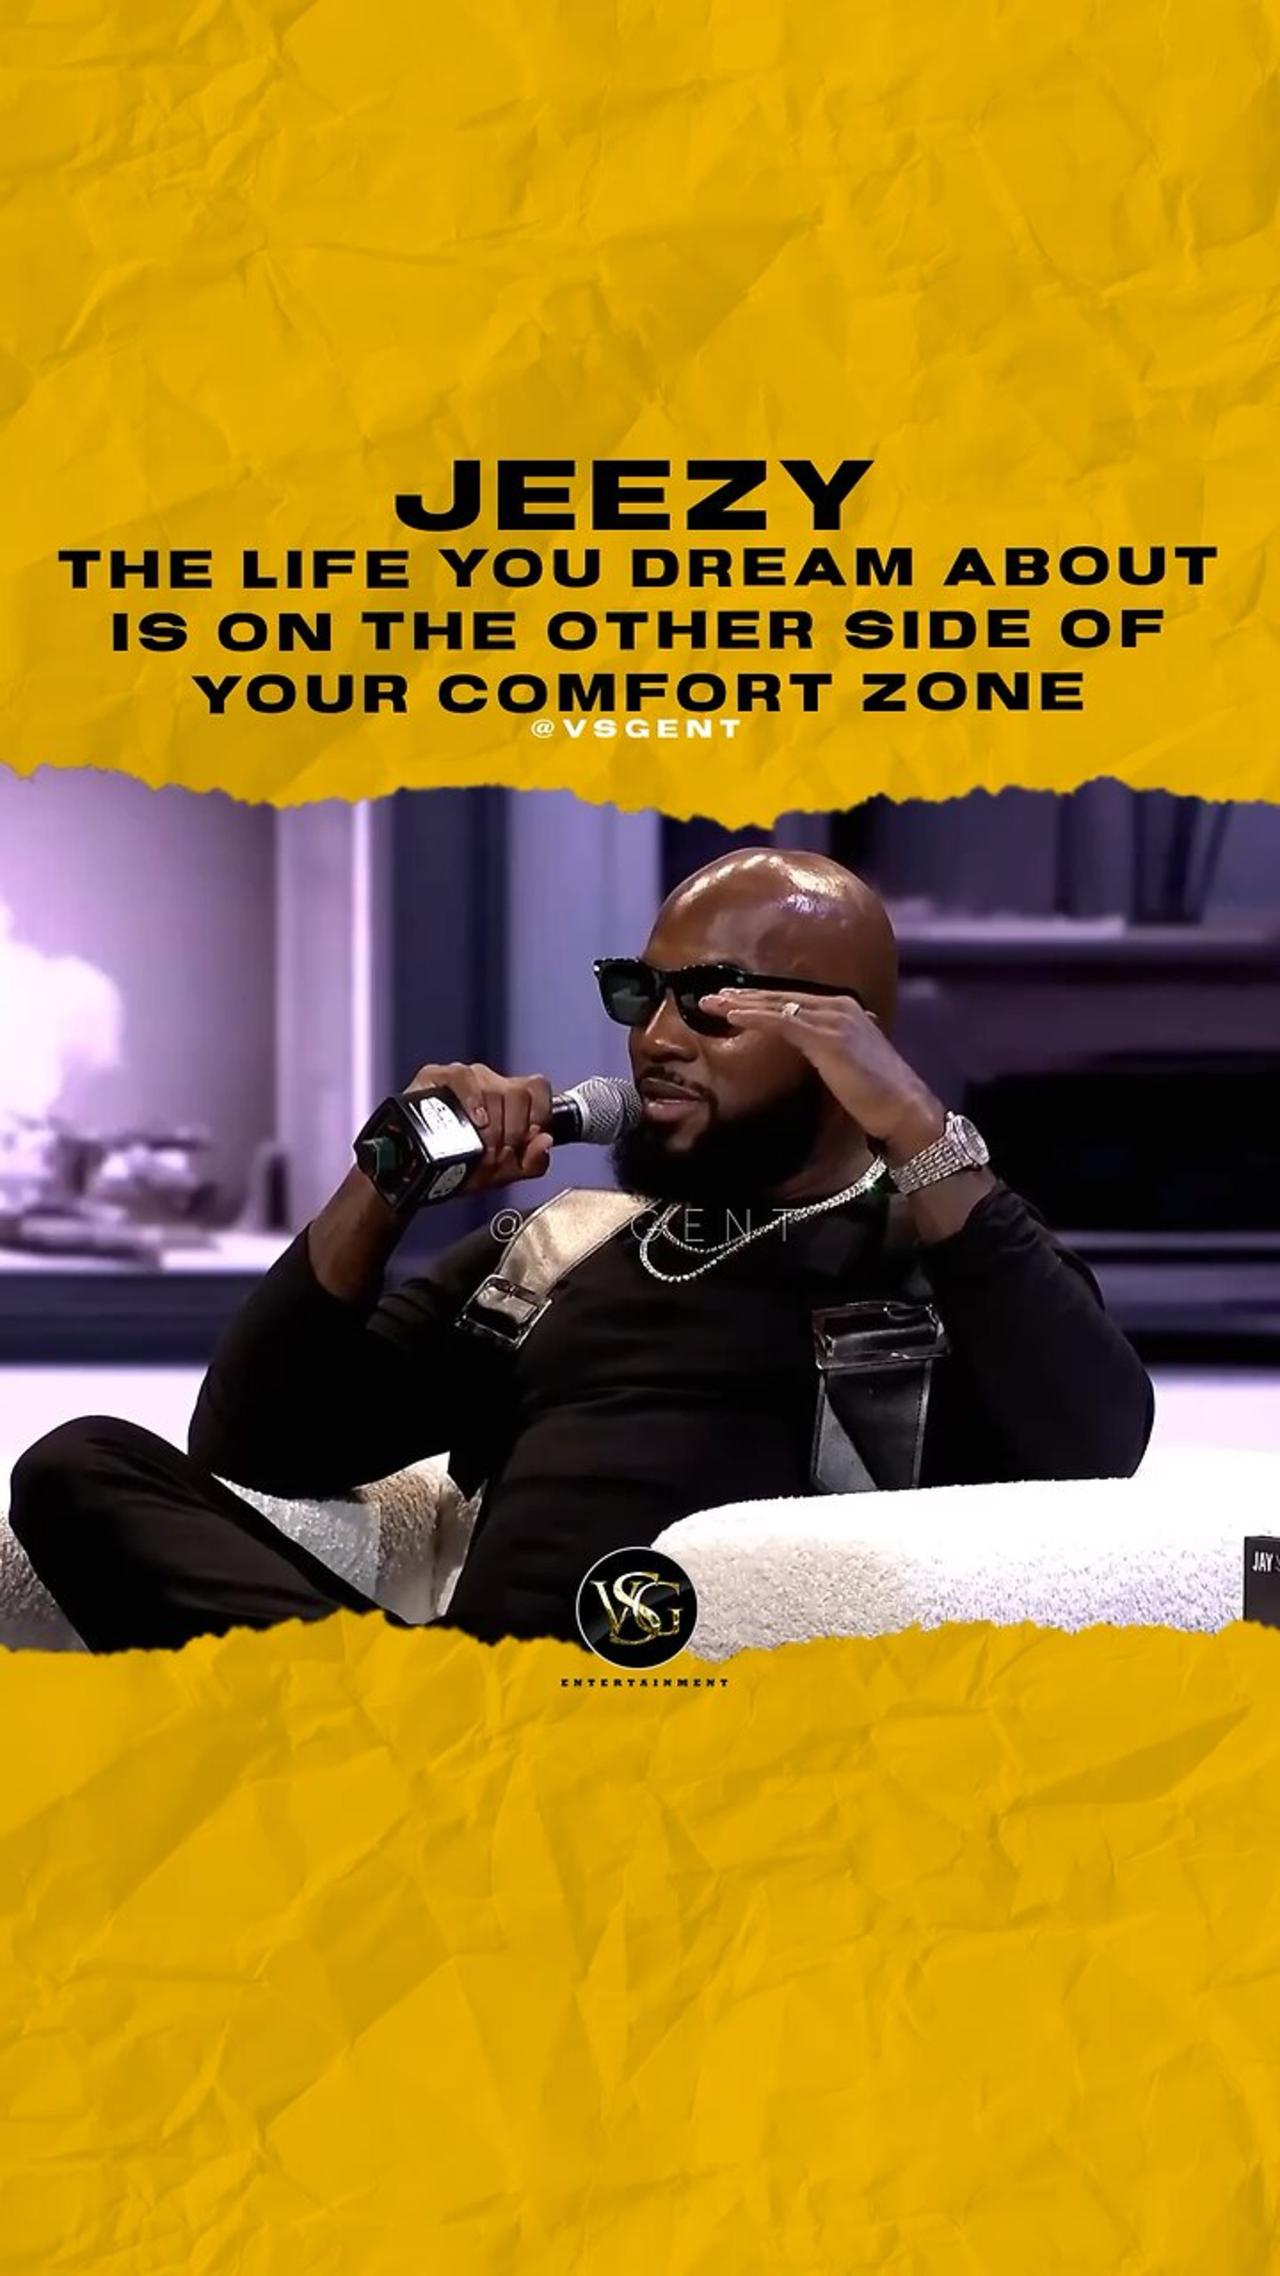 @jeezy The life you dream about is on the other side of your comfort zone.